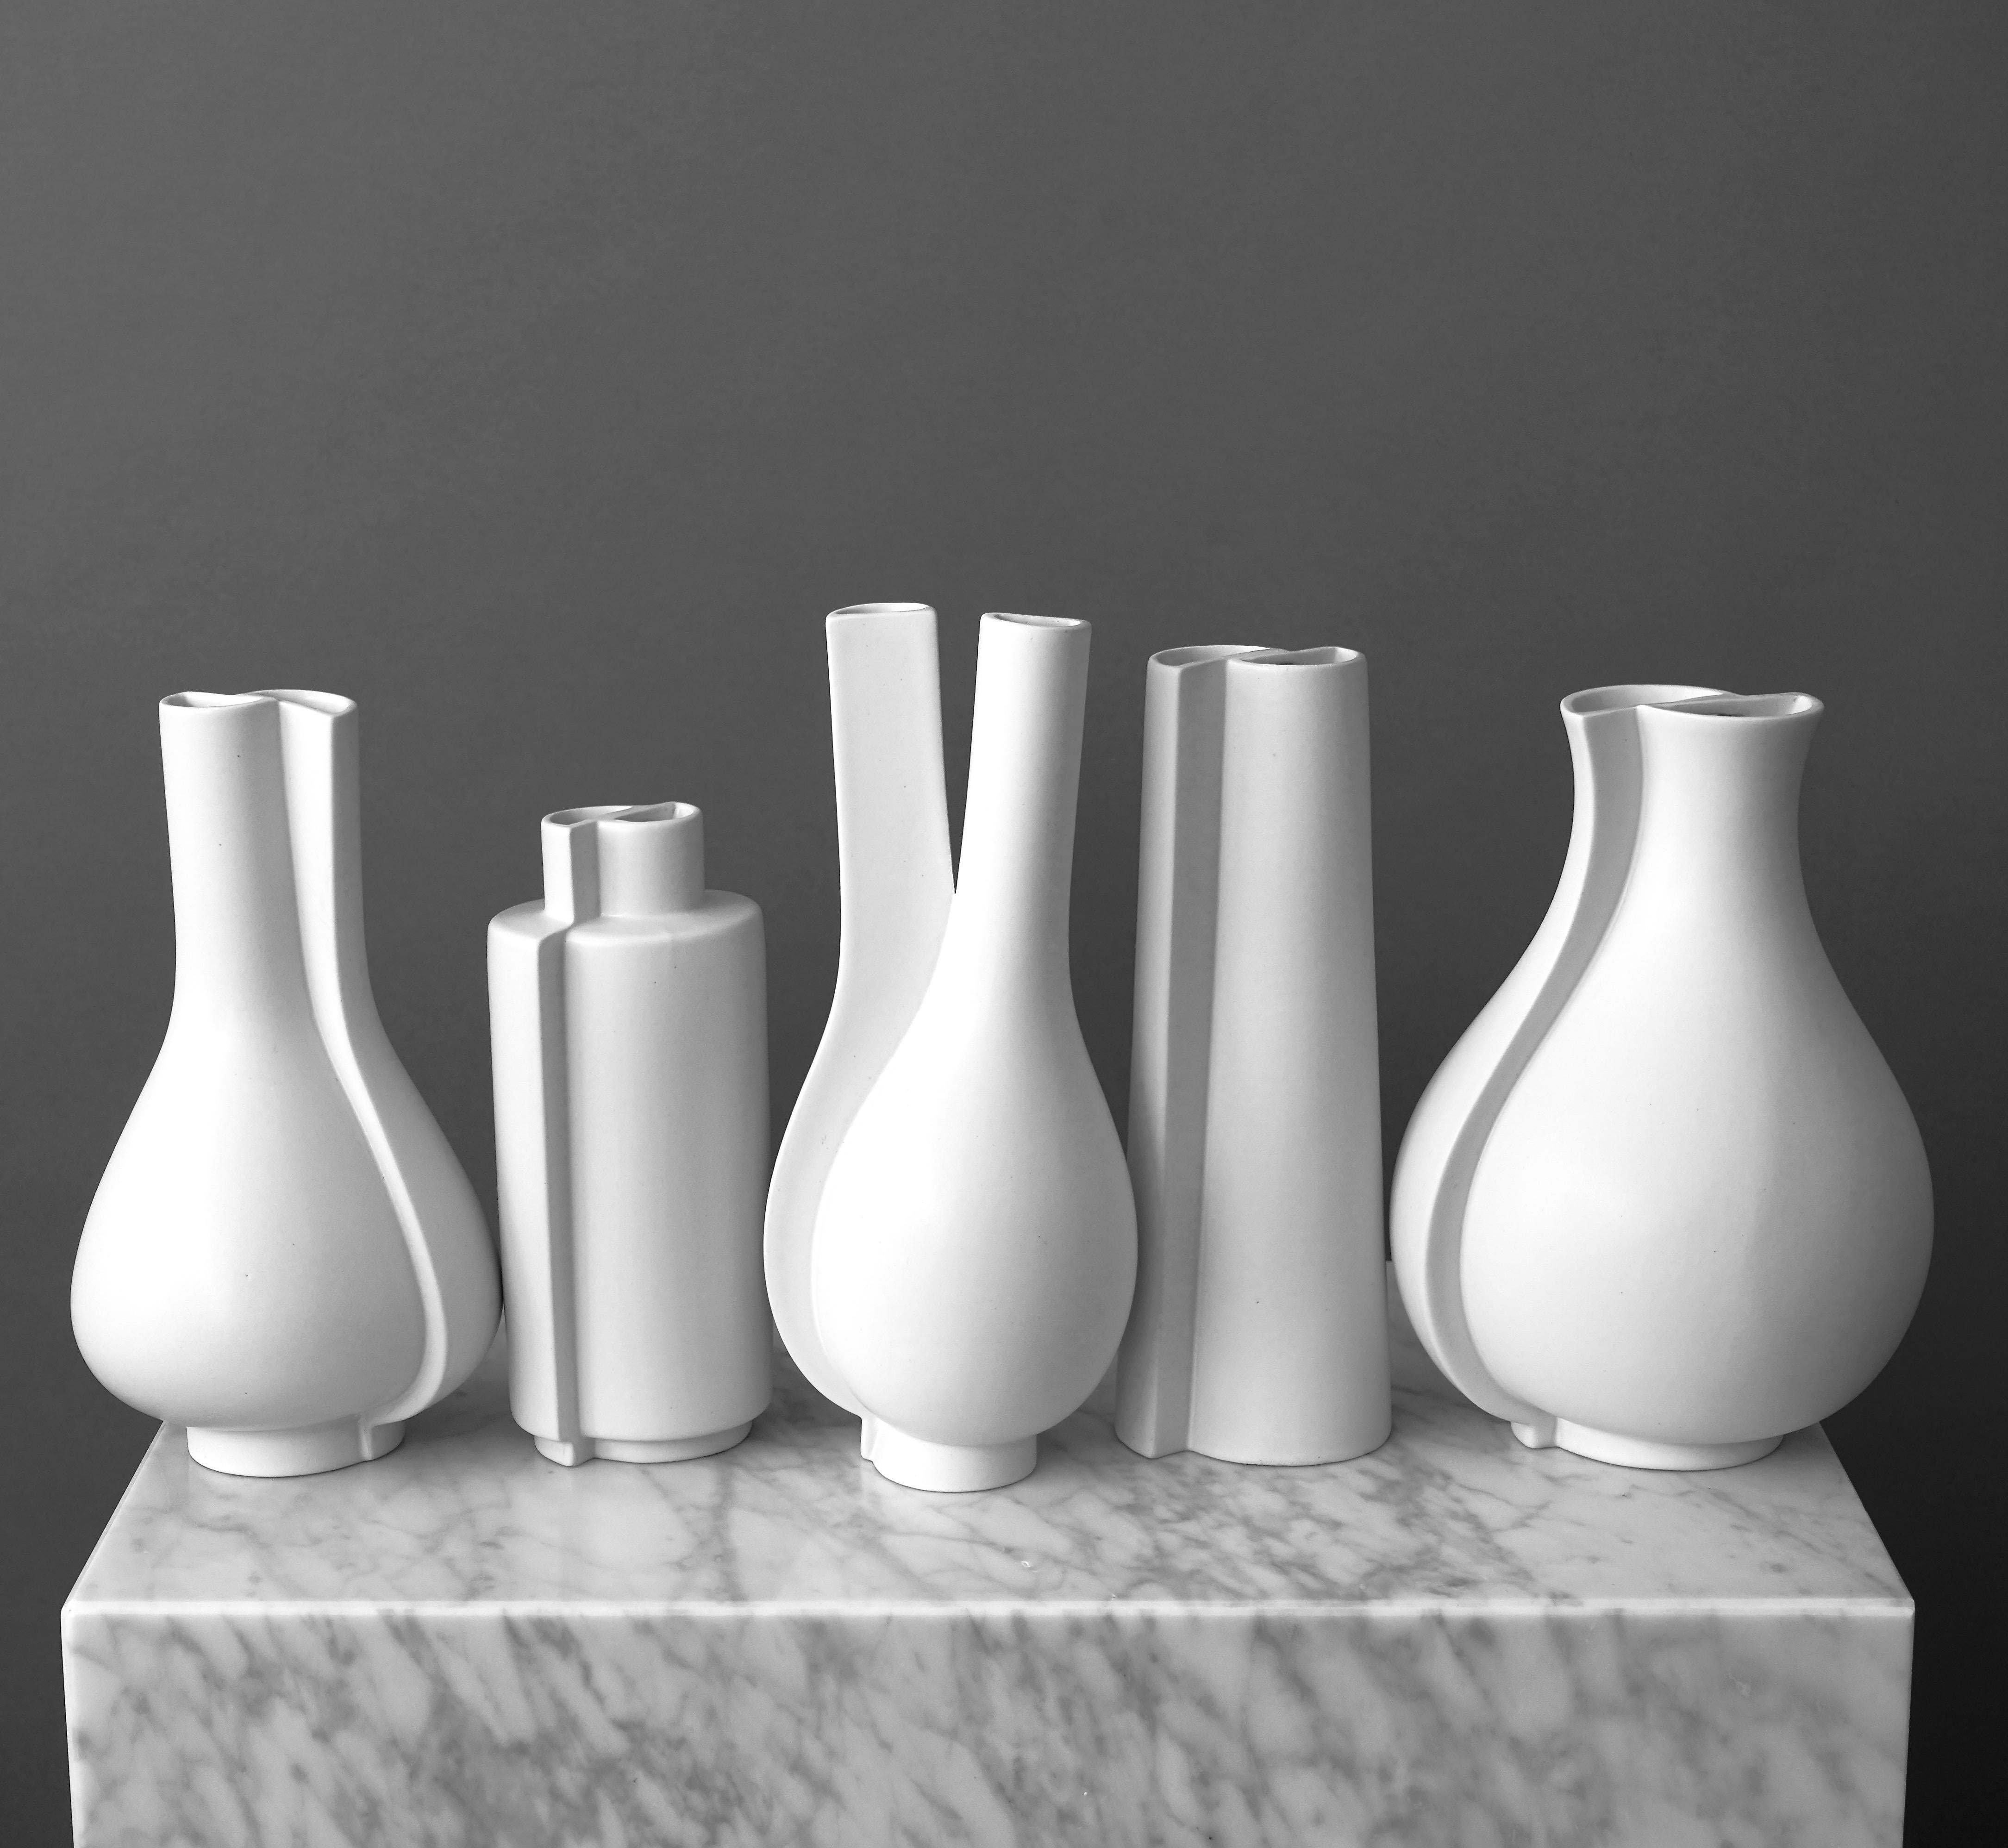 Five stunning 'Surrea' stoneware vases with 'Carrara' glaze. 
Made by Wilhelm Kåge at Gustavsberg Studio in Sweden, 1950s. 

Excellent condition. 
Stamped 'Gustavsberg / SURREA'.

This is a full set of 'Surrea' vases this size, please see my other